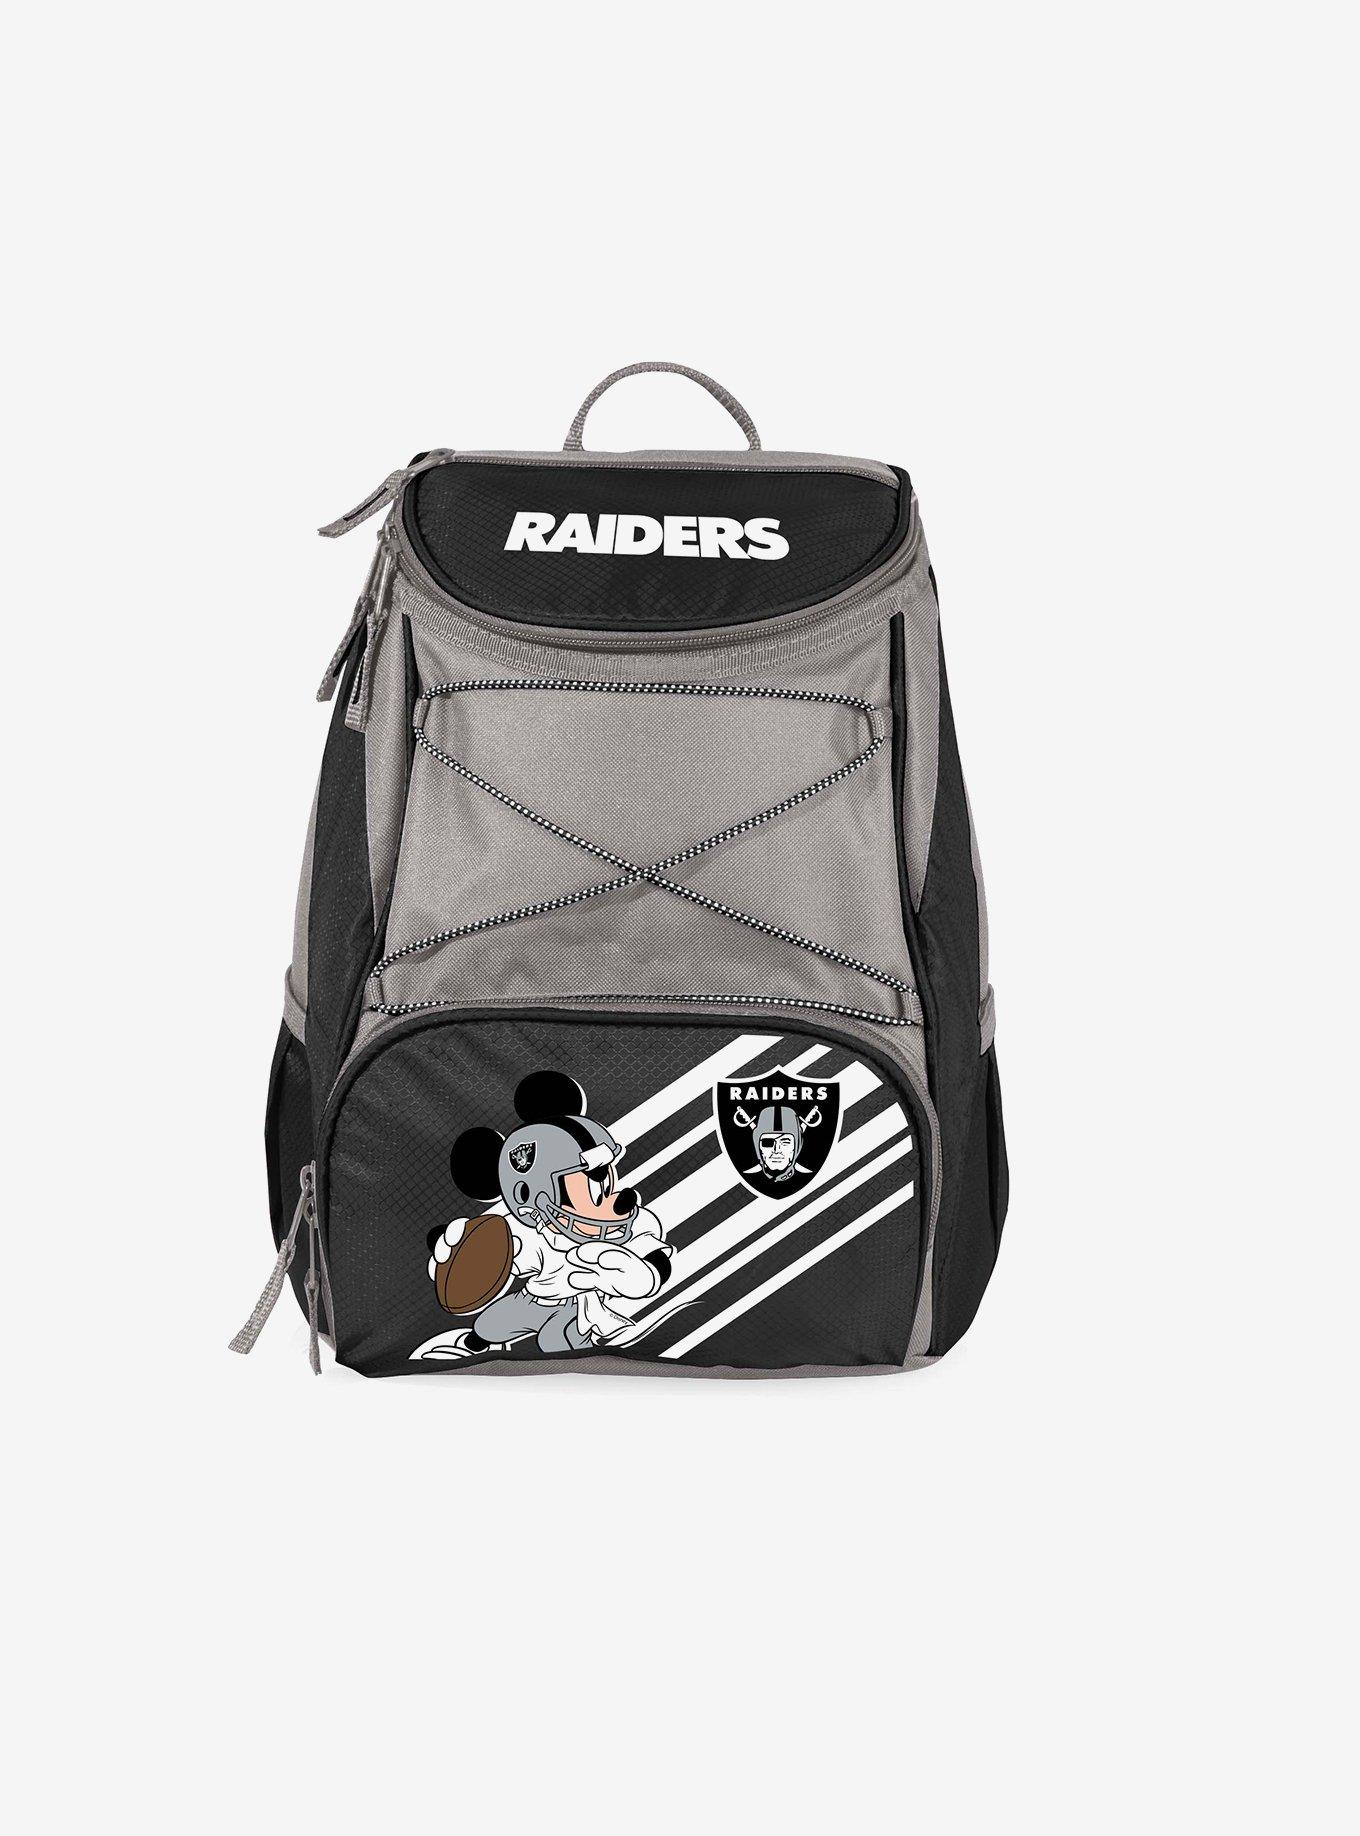 NFL Las Vegas Raiders Mickey Mouse on The Go Lunch Cooler - Black